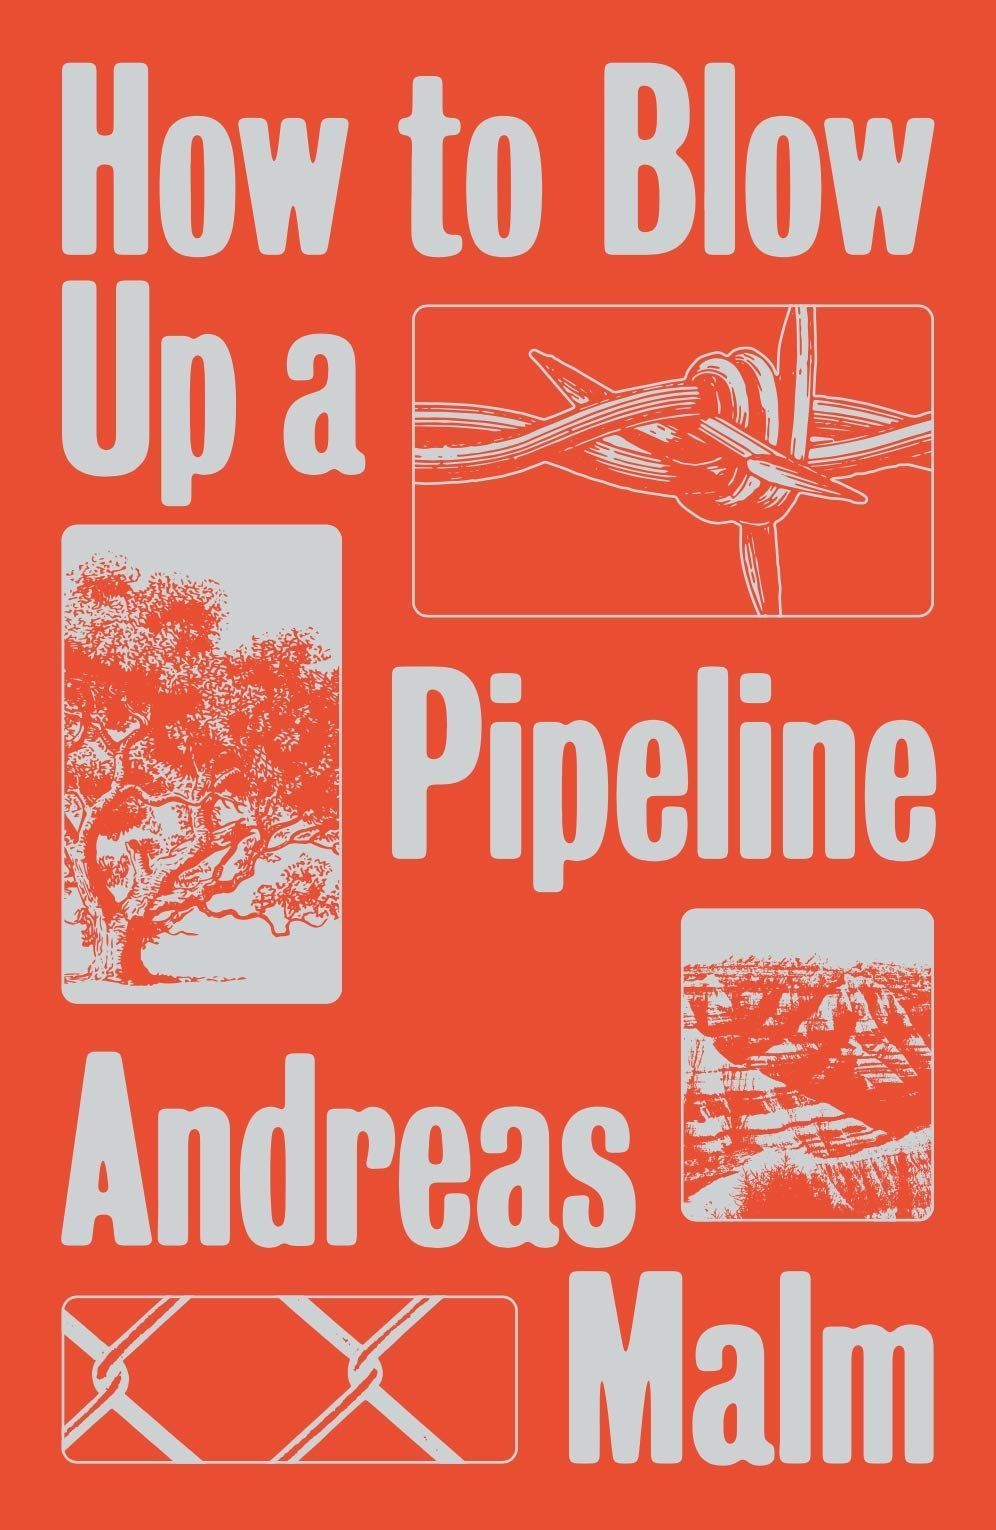 Sabotage Can Be Done Softly: On Andreas Malm’s “How to Blow Up a Pipeline”